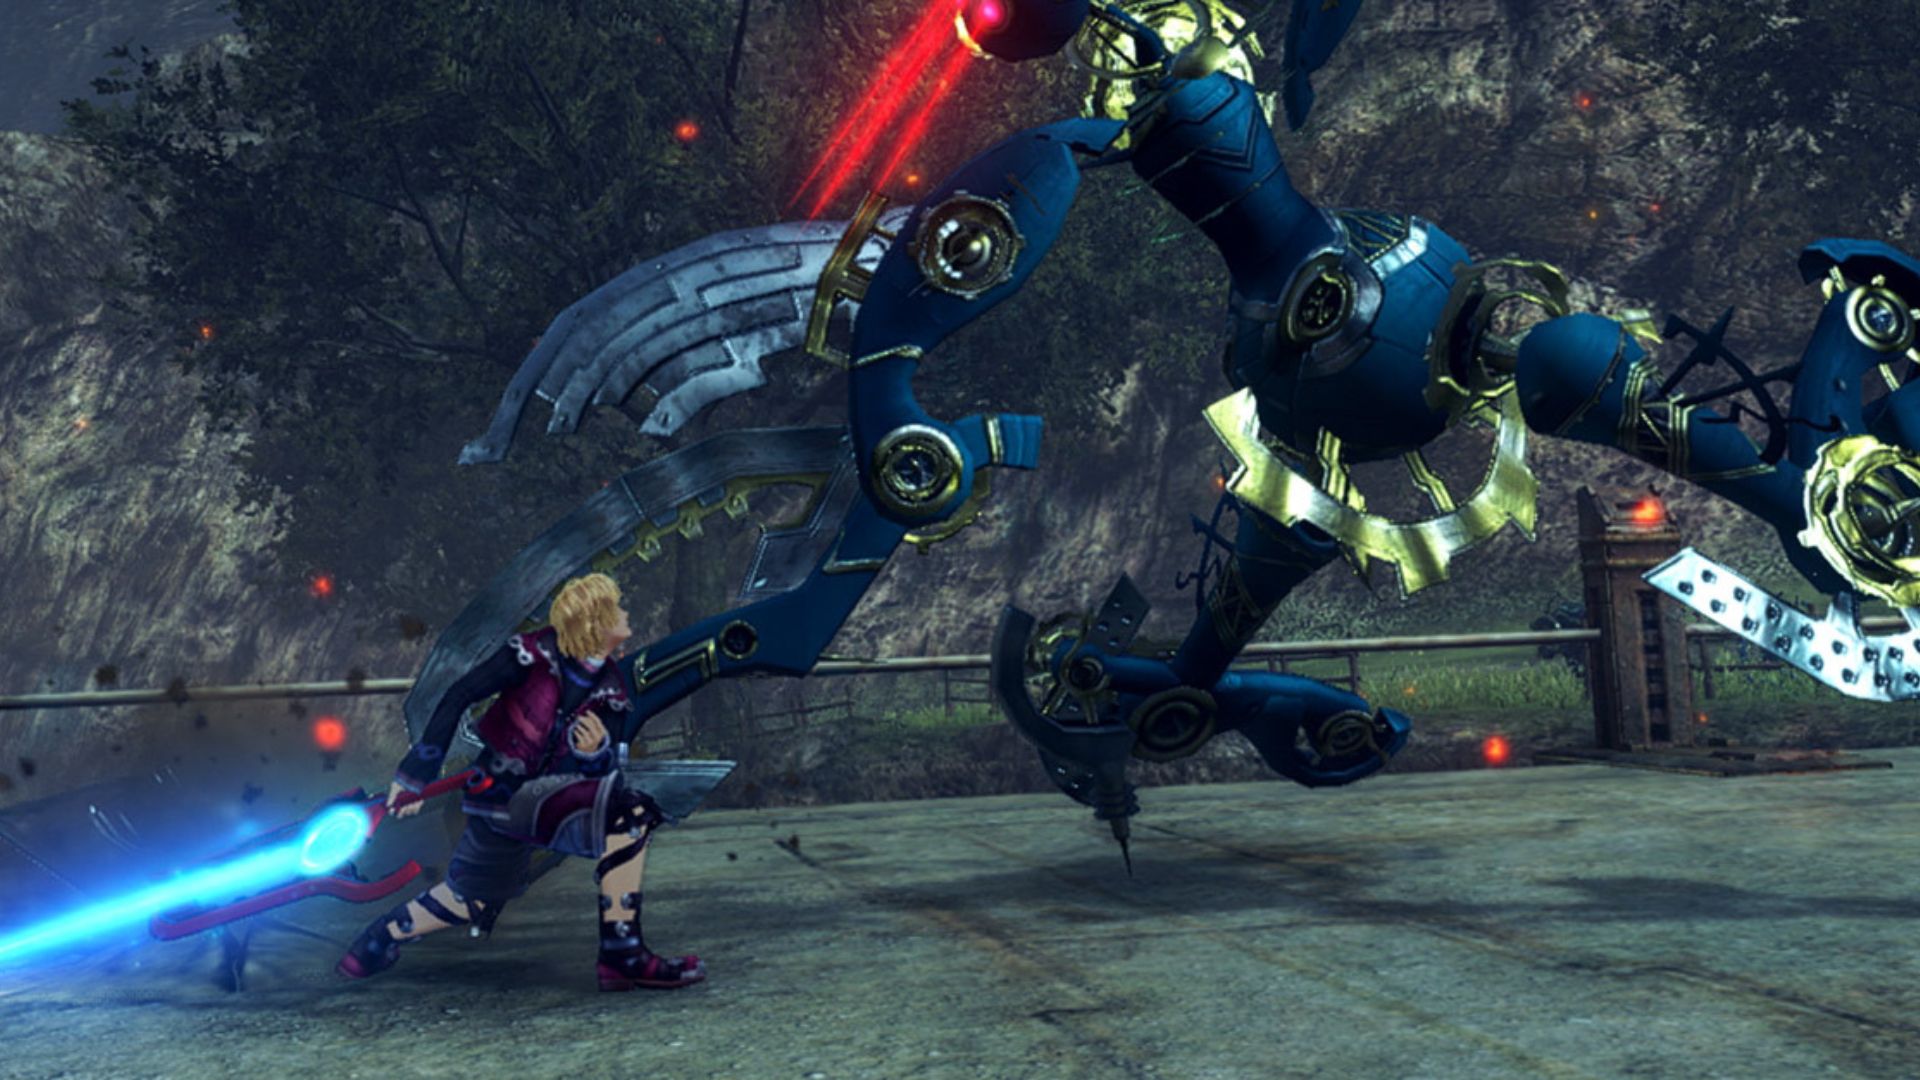 XENOBLADE CHRONICLES 3 METACRITIC REVIEW SCORES ARE IN, CRITICAL ACCLAIM